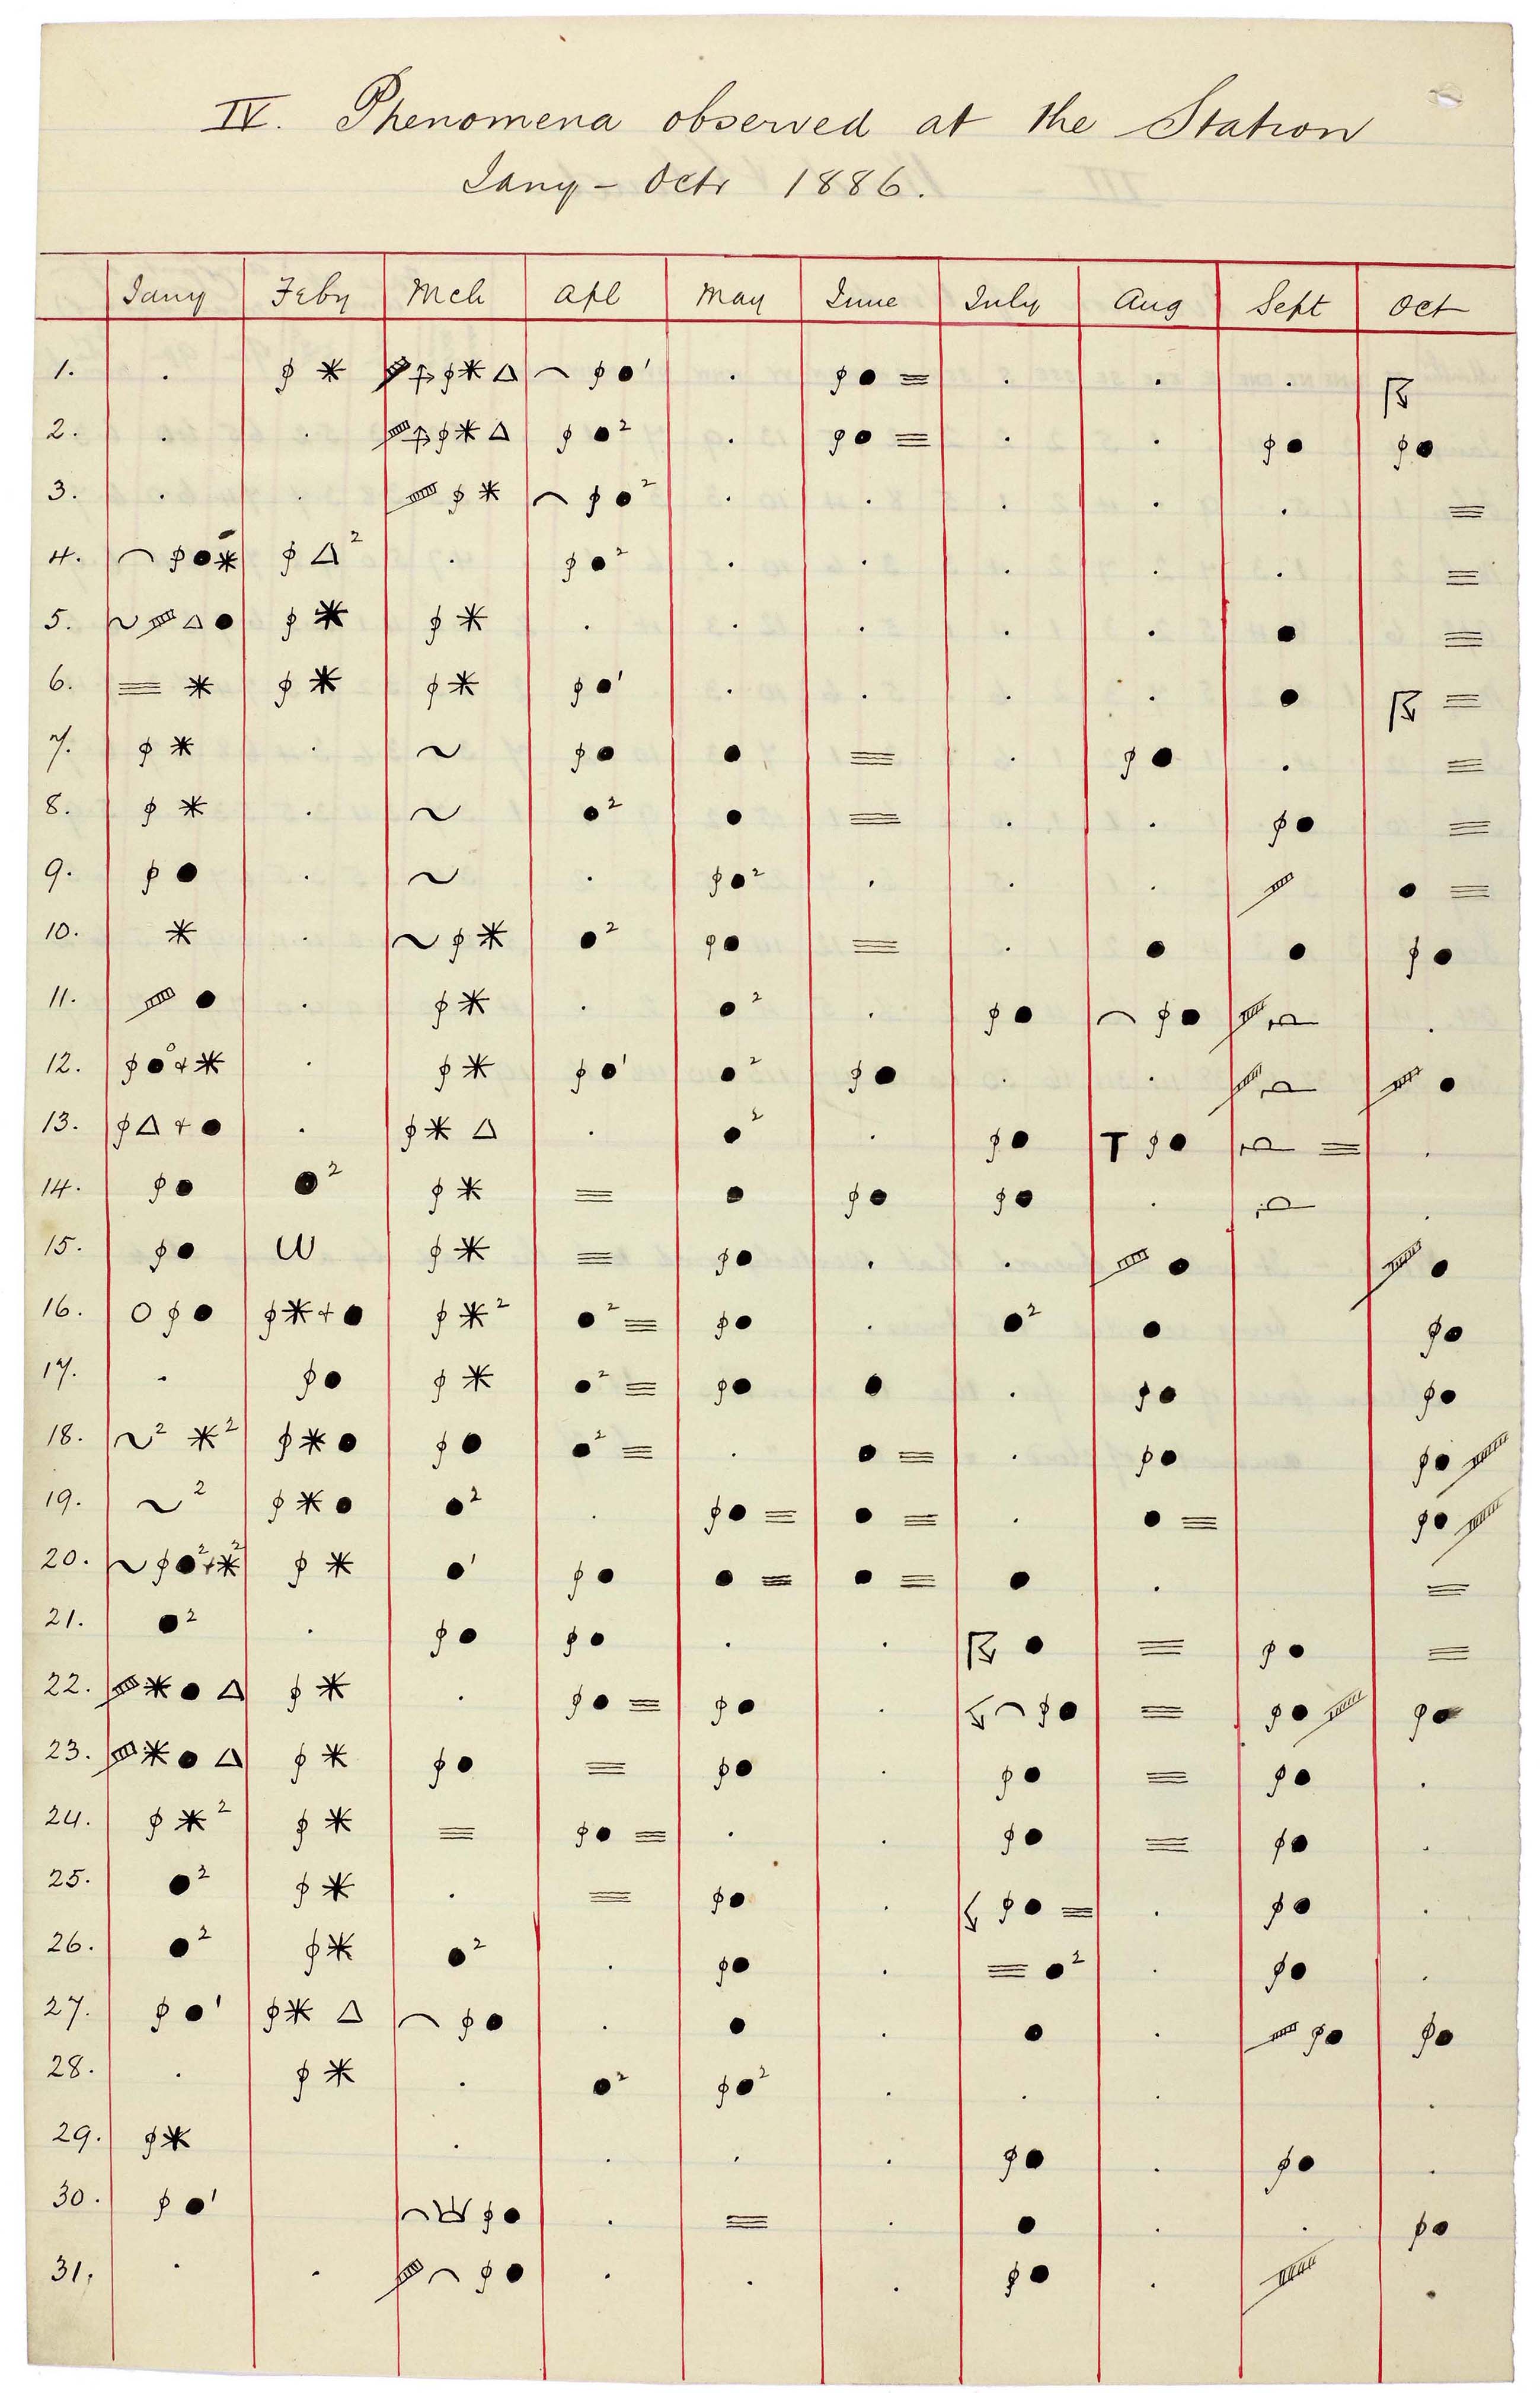 Summary of Met Office weather report, Whitby Lighthouse, January to October 1886.